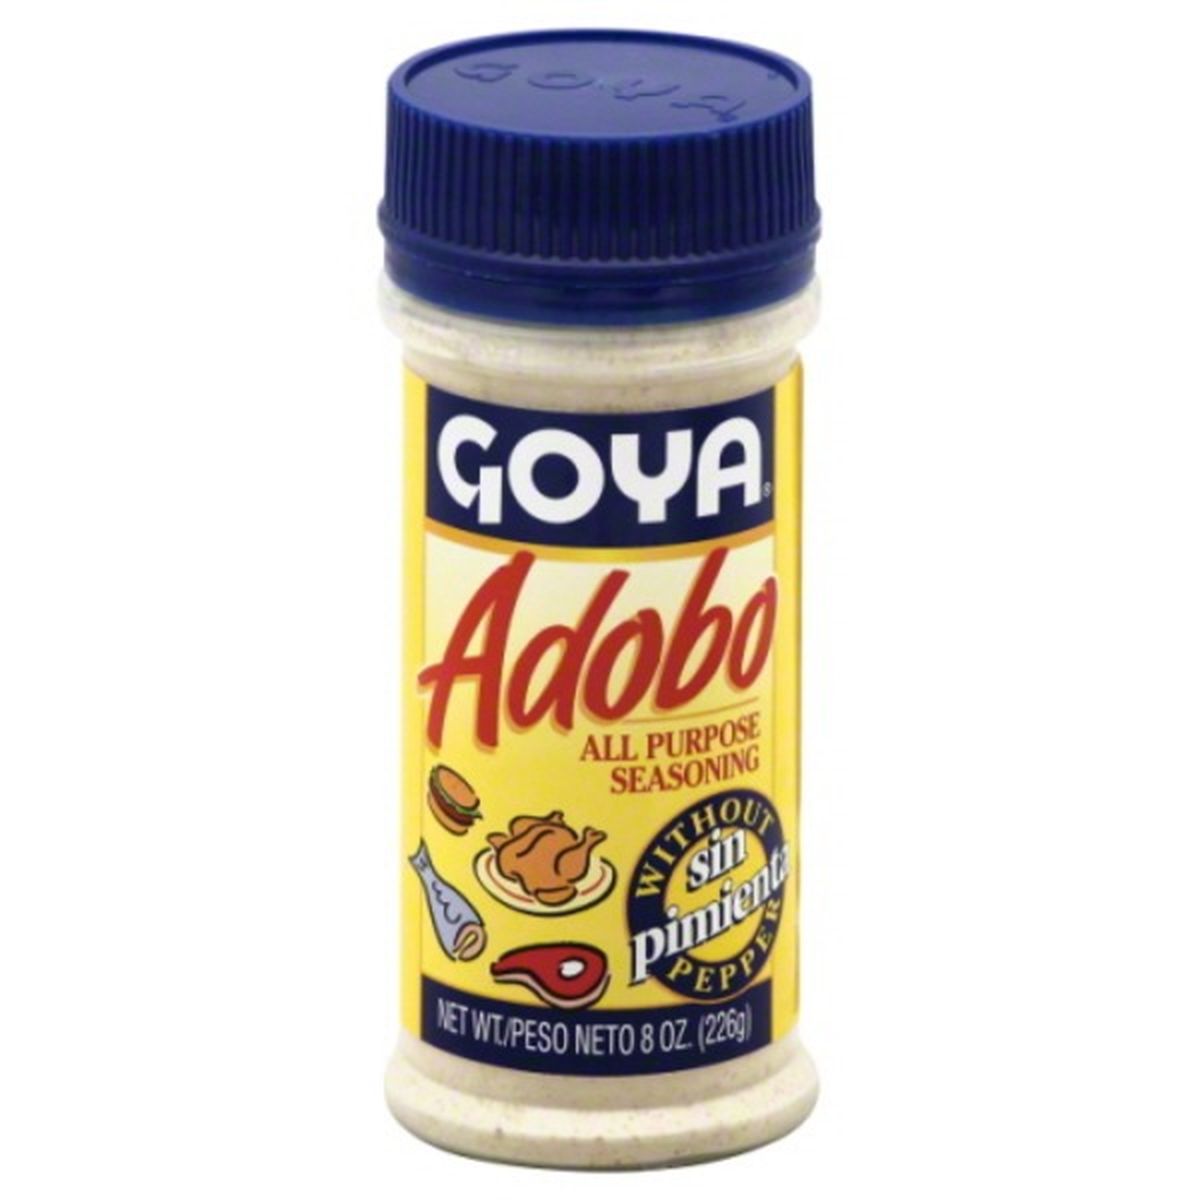 Calories in Goya Adobo Seasoning, All Purpose, without Pepper